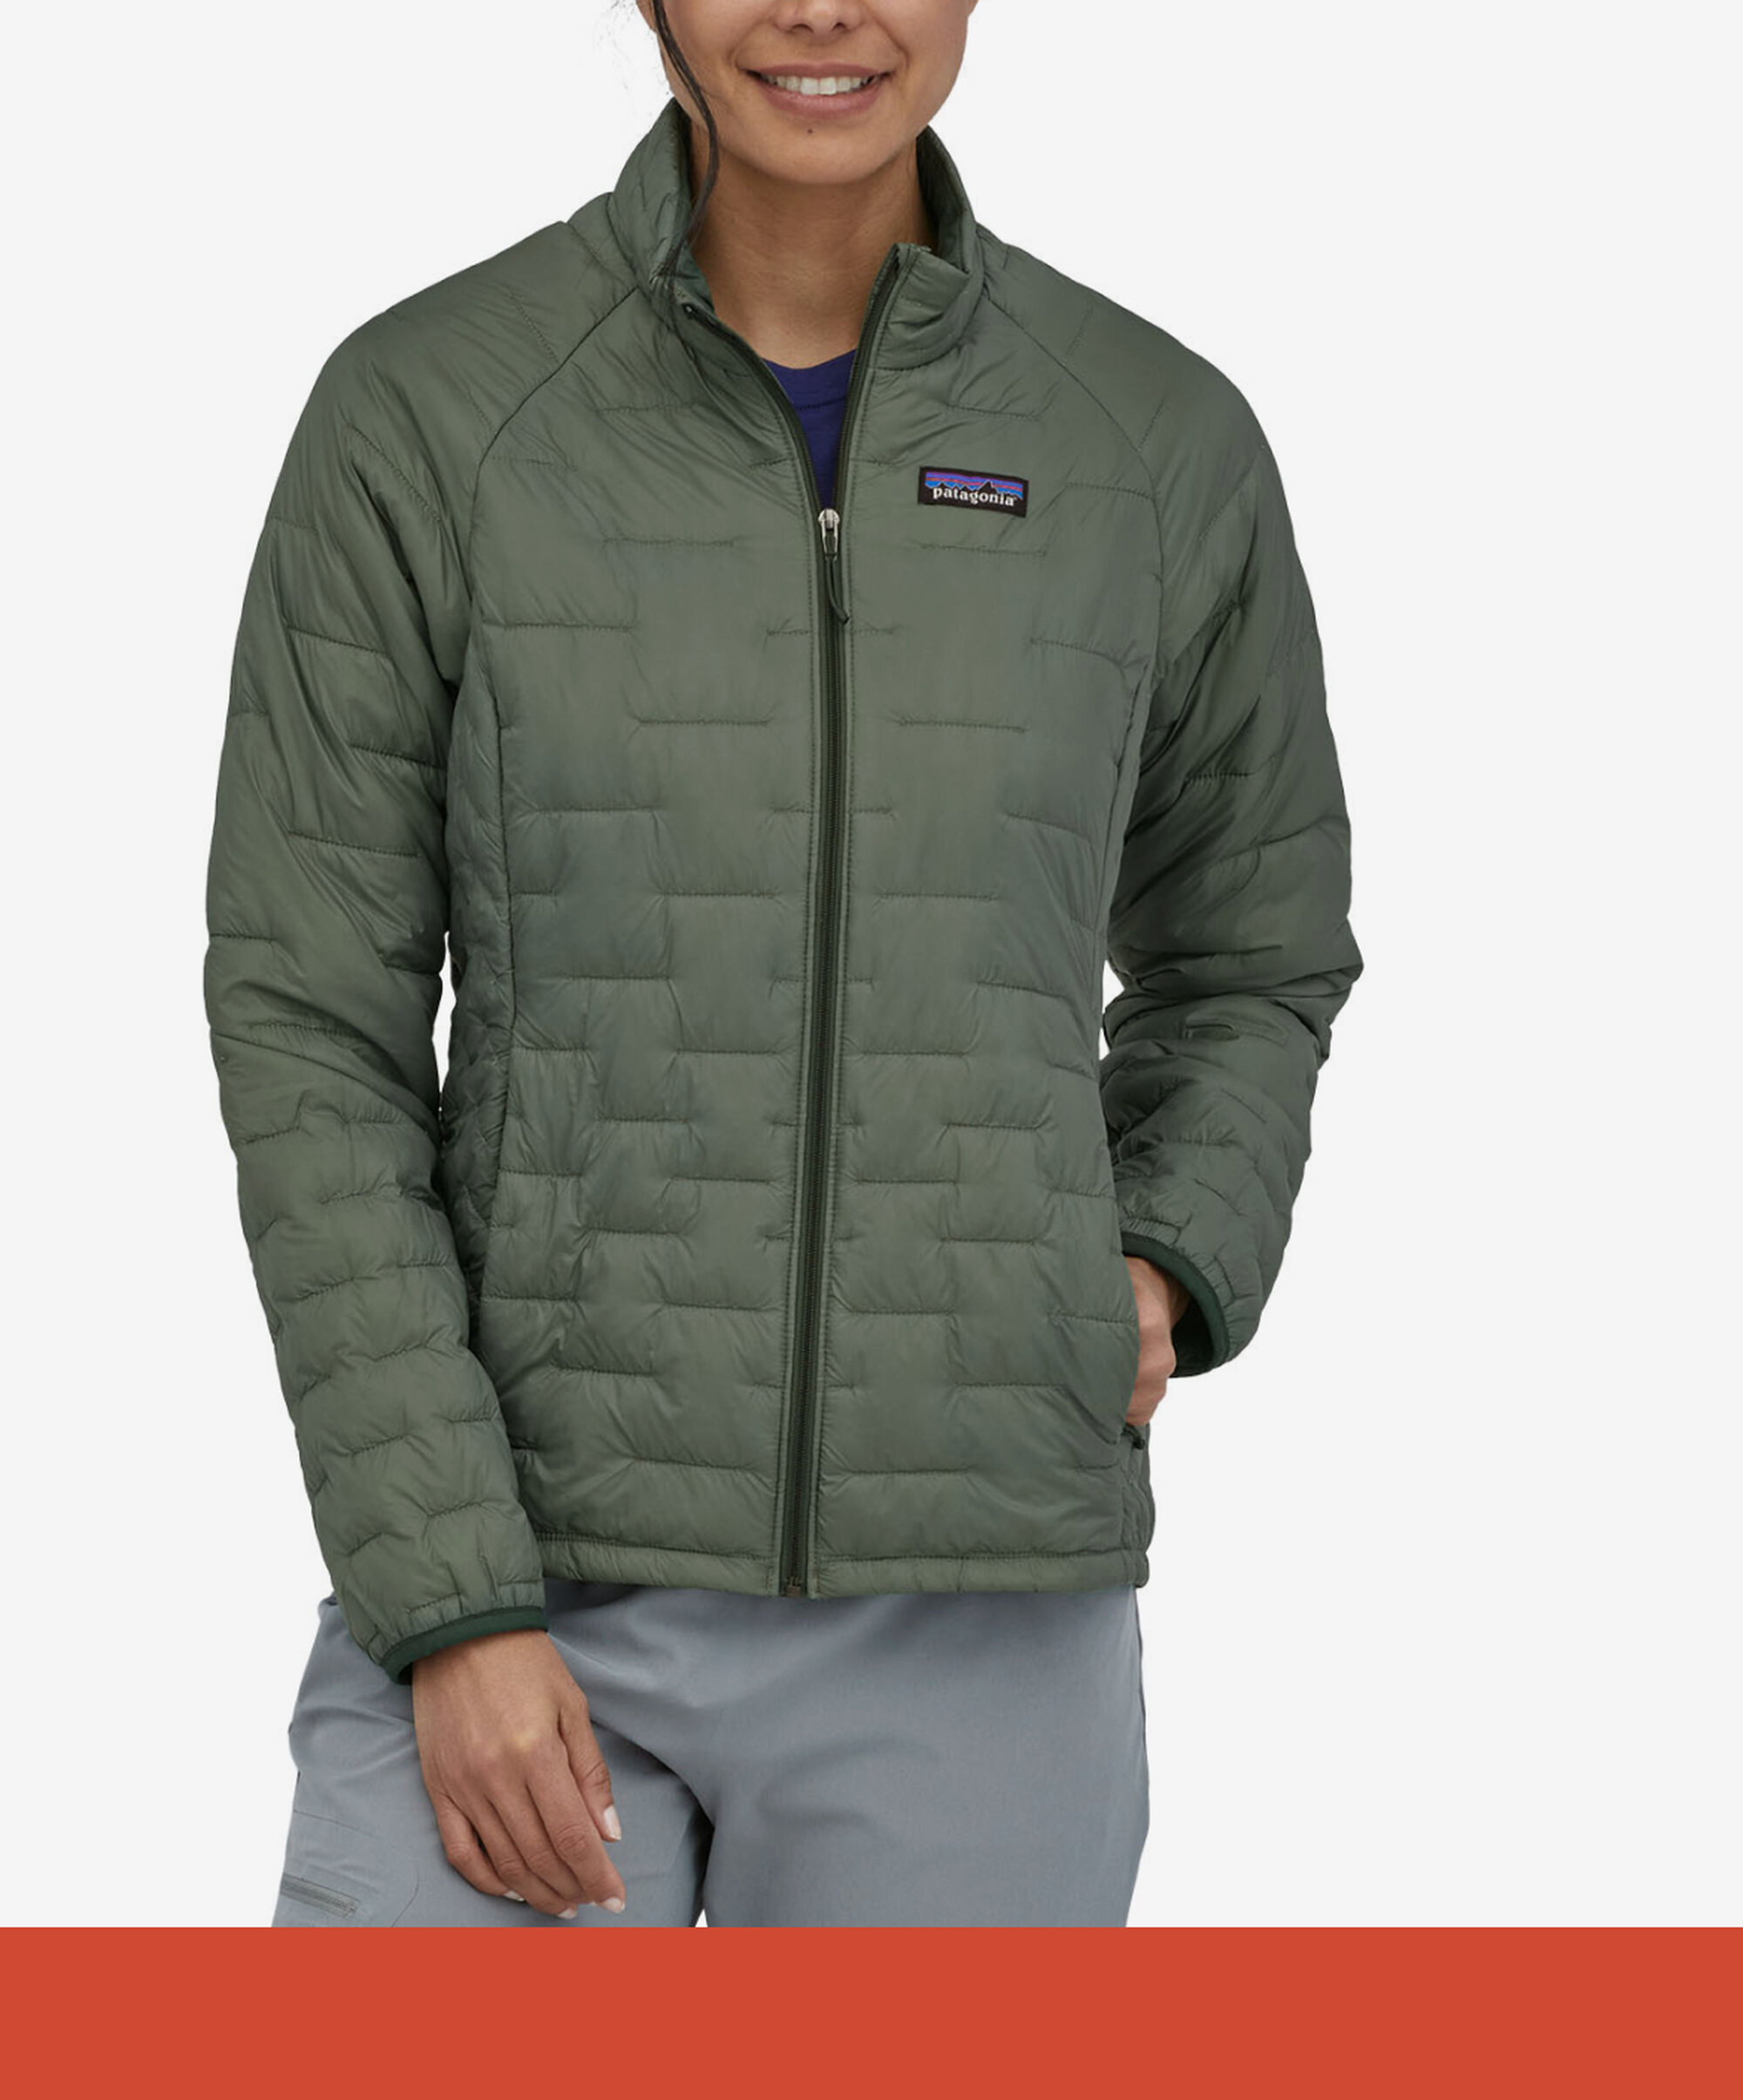 Women's Technical Insulation by Patagonia